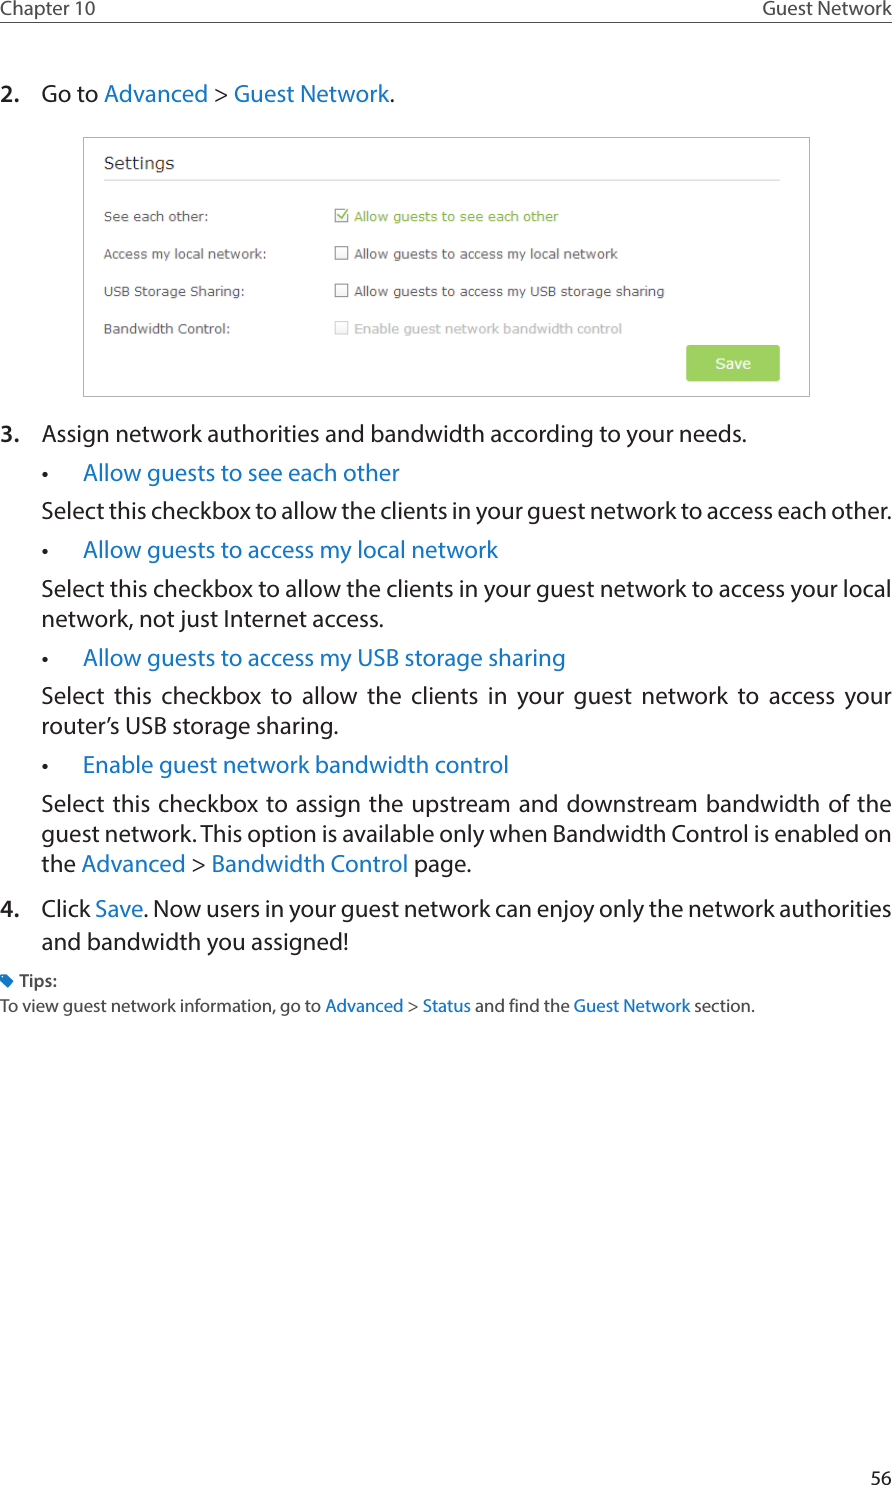 56Chapter 10 Guest Network2.  Go to Advanced &gt; Guest Network.3.  Assign network authorities and bandwidth according to your needs.•  Allow guests to see each otherSelect this checkbox to allow the clients in your guest network to access each other. •  Allow guests to access my local network Select this checkbox to allow the clients in your guest network to access your local network, not just Internet access. •  Allow guests to access my USB storage sharing Select this checkbox to allow the clients in your guest network to access your router’s USB storage sharing.•  Enable guest network bandwidth controlSelect this checkbox to assign the upstream and downstream bandwidth of the guest network. This option is available only when Bandwidth Control is enabled on the Advanced &gt; Bandwidth Control page.4.  Click Save. Now users in your guest network can enjoy only the network authorities and bandwidth you assigned!Tips:To view guest network information, go to Advanced &gt; Status and find the Guest Network section.